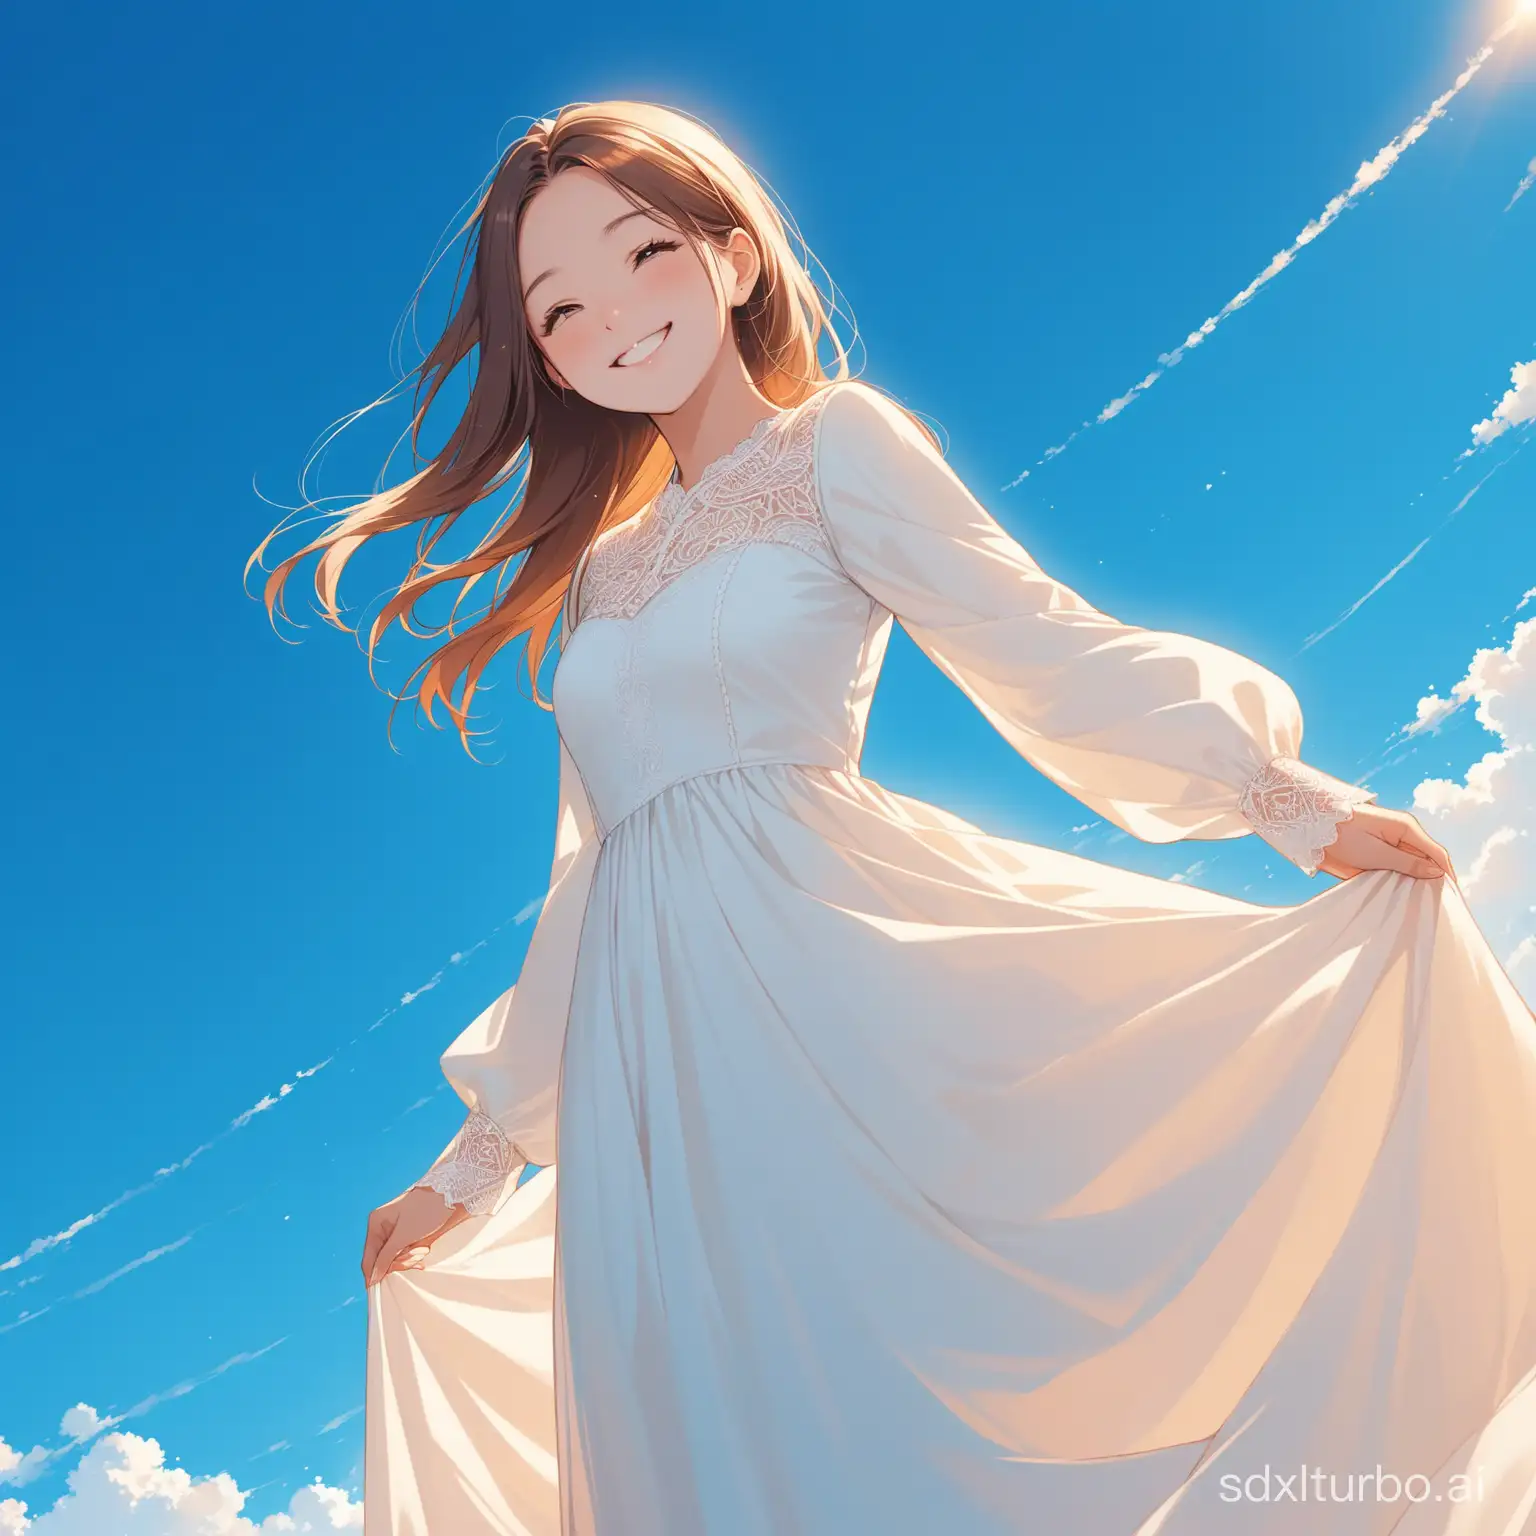 A smiling girl, wearing a white long dress with long sleeves against a blue sky background